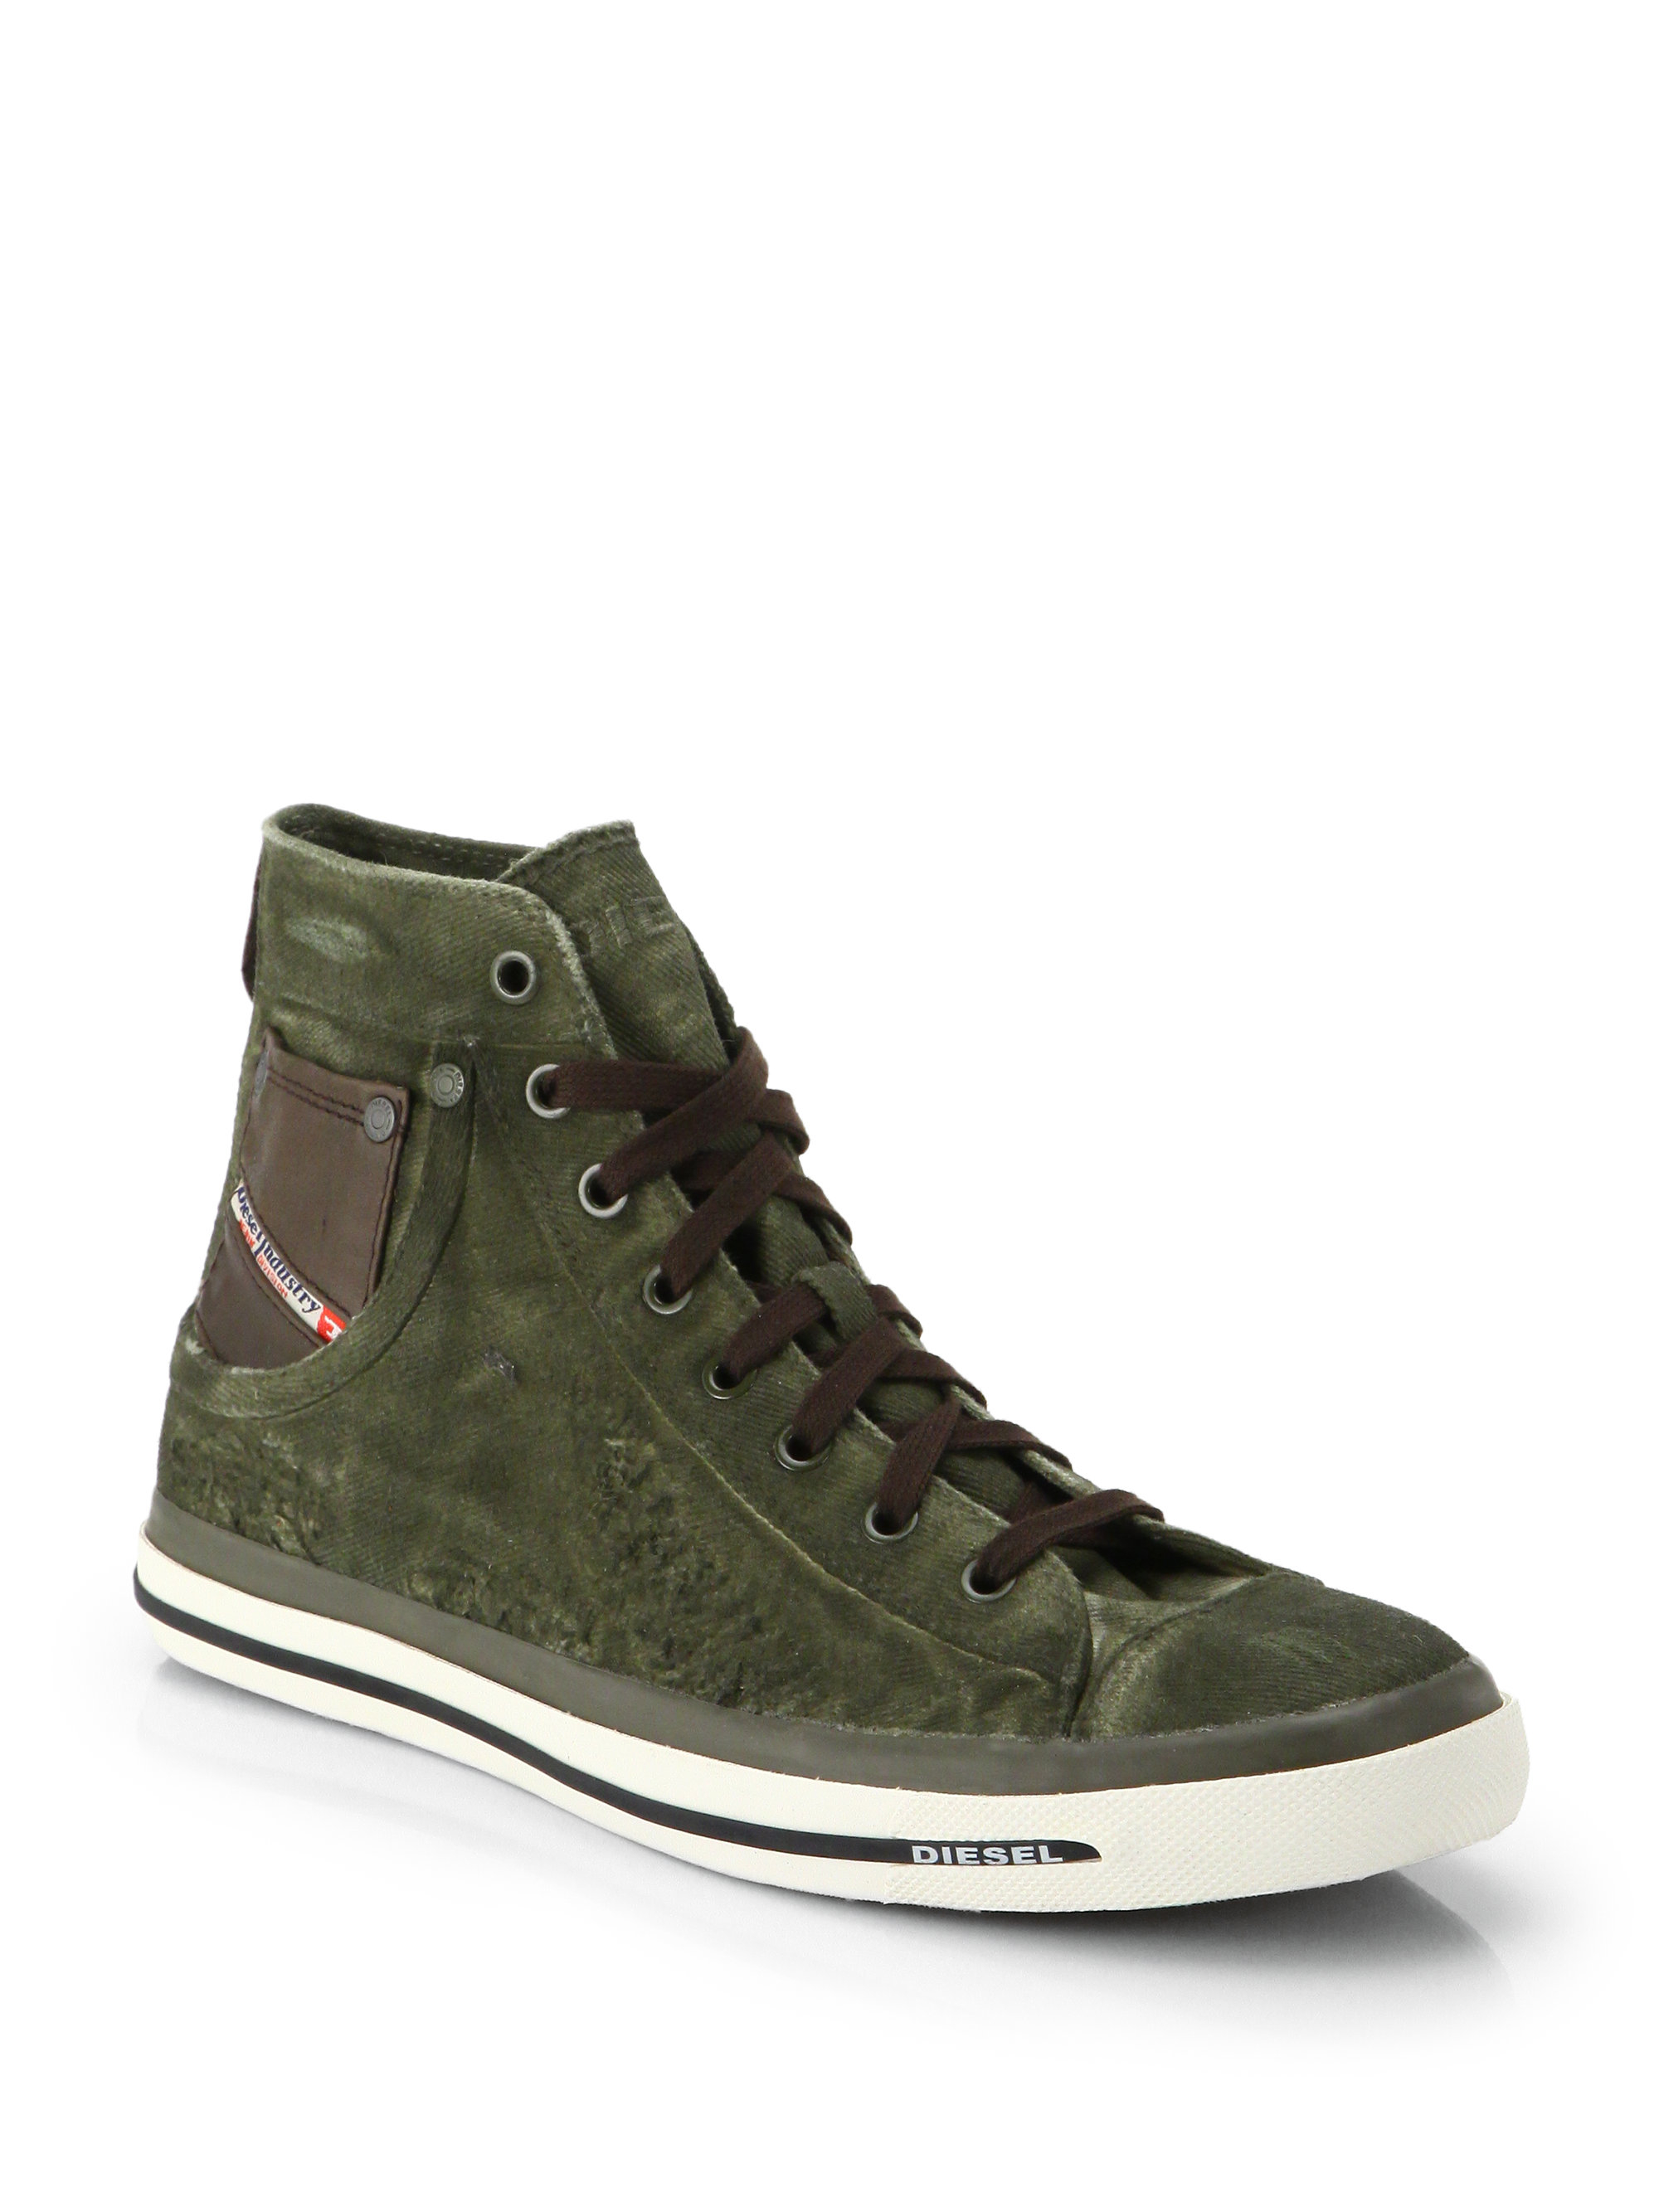 Top Sneakers in Olive-Green 